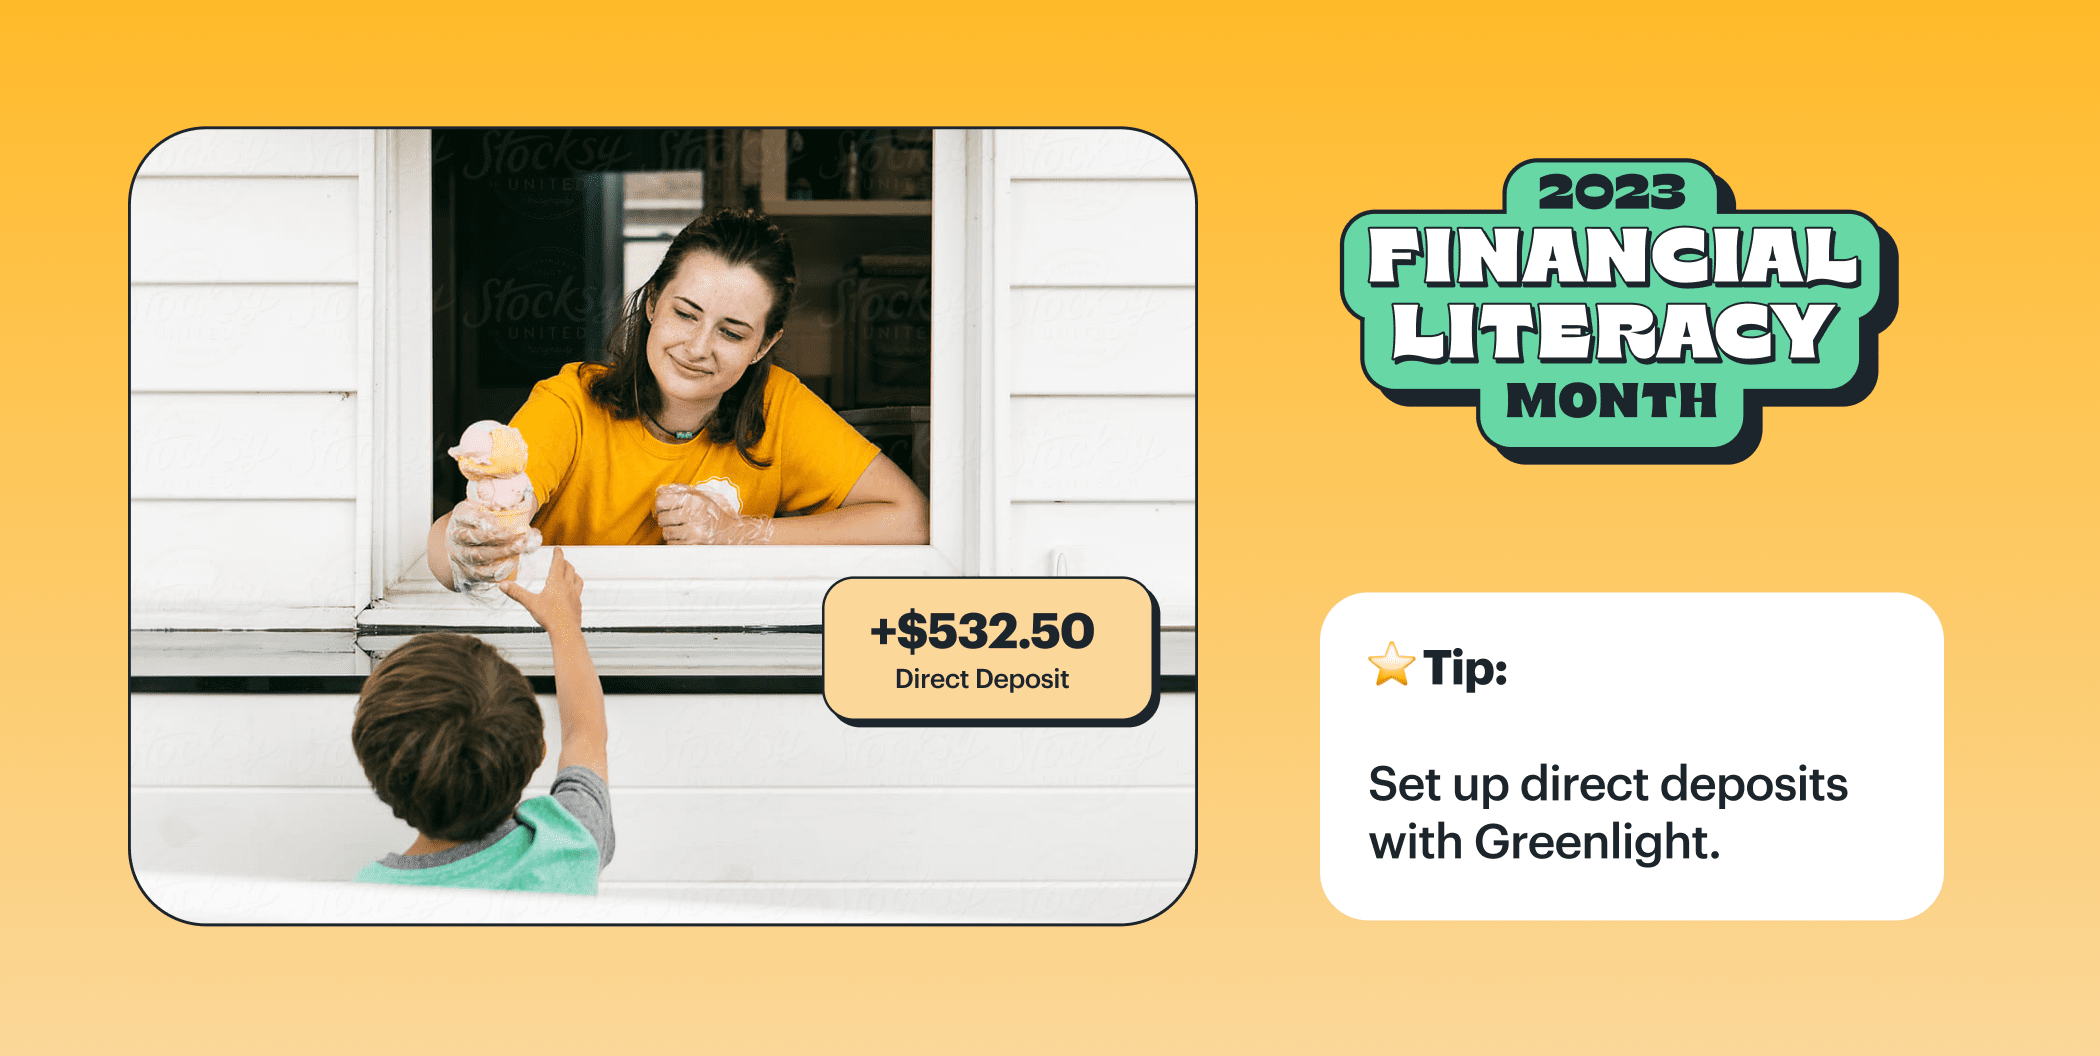 2023 financial literacy month tip: set up direct deposits with Greenlight, money app for kids, teens